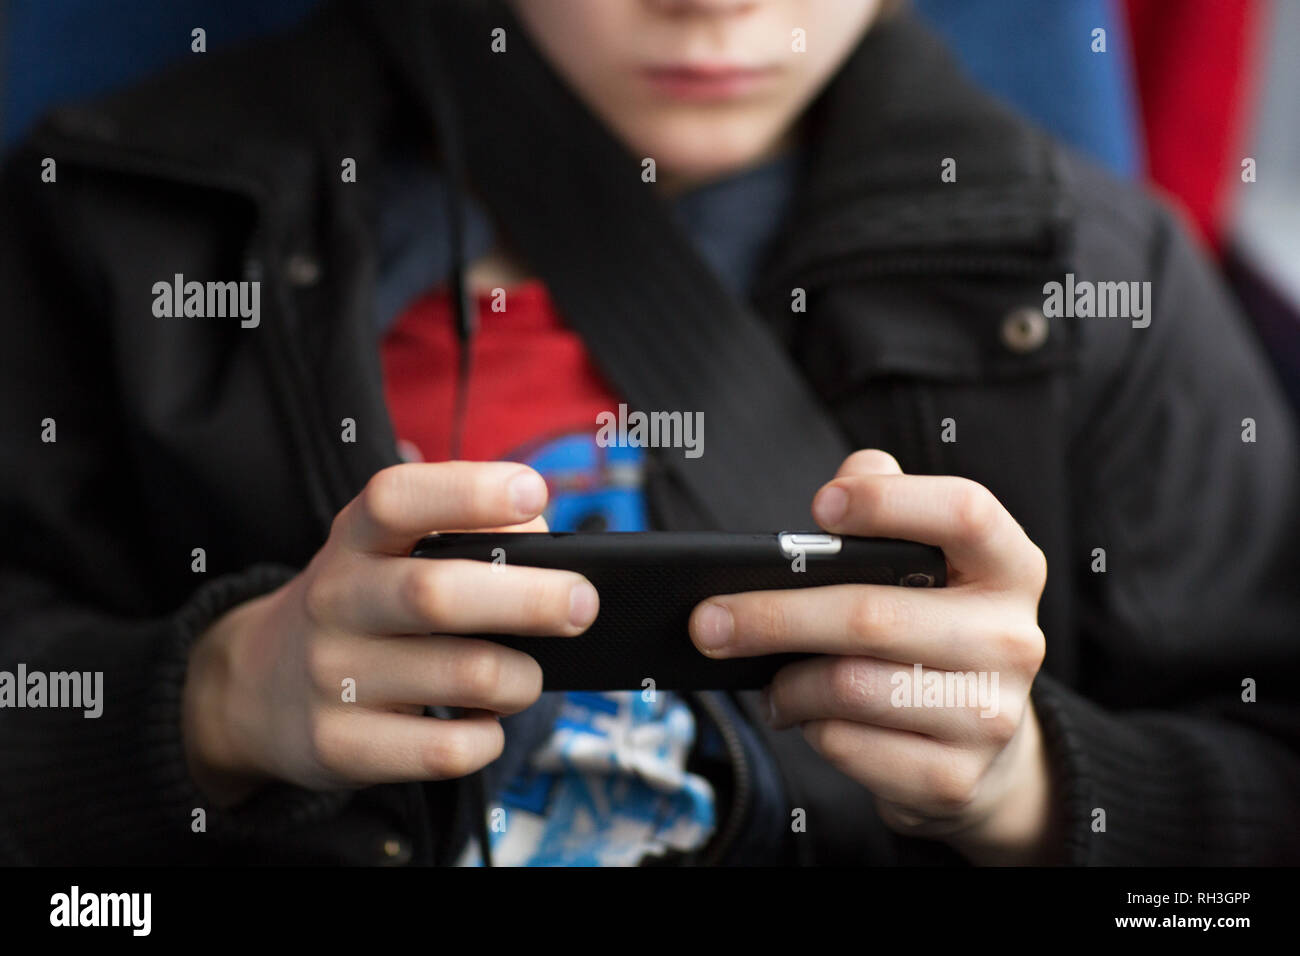 Boy with cell phone, close-up Stock Photo